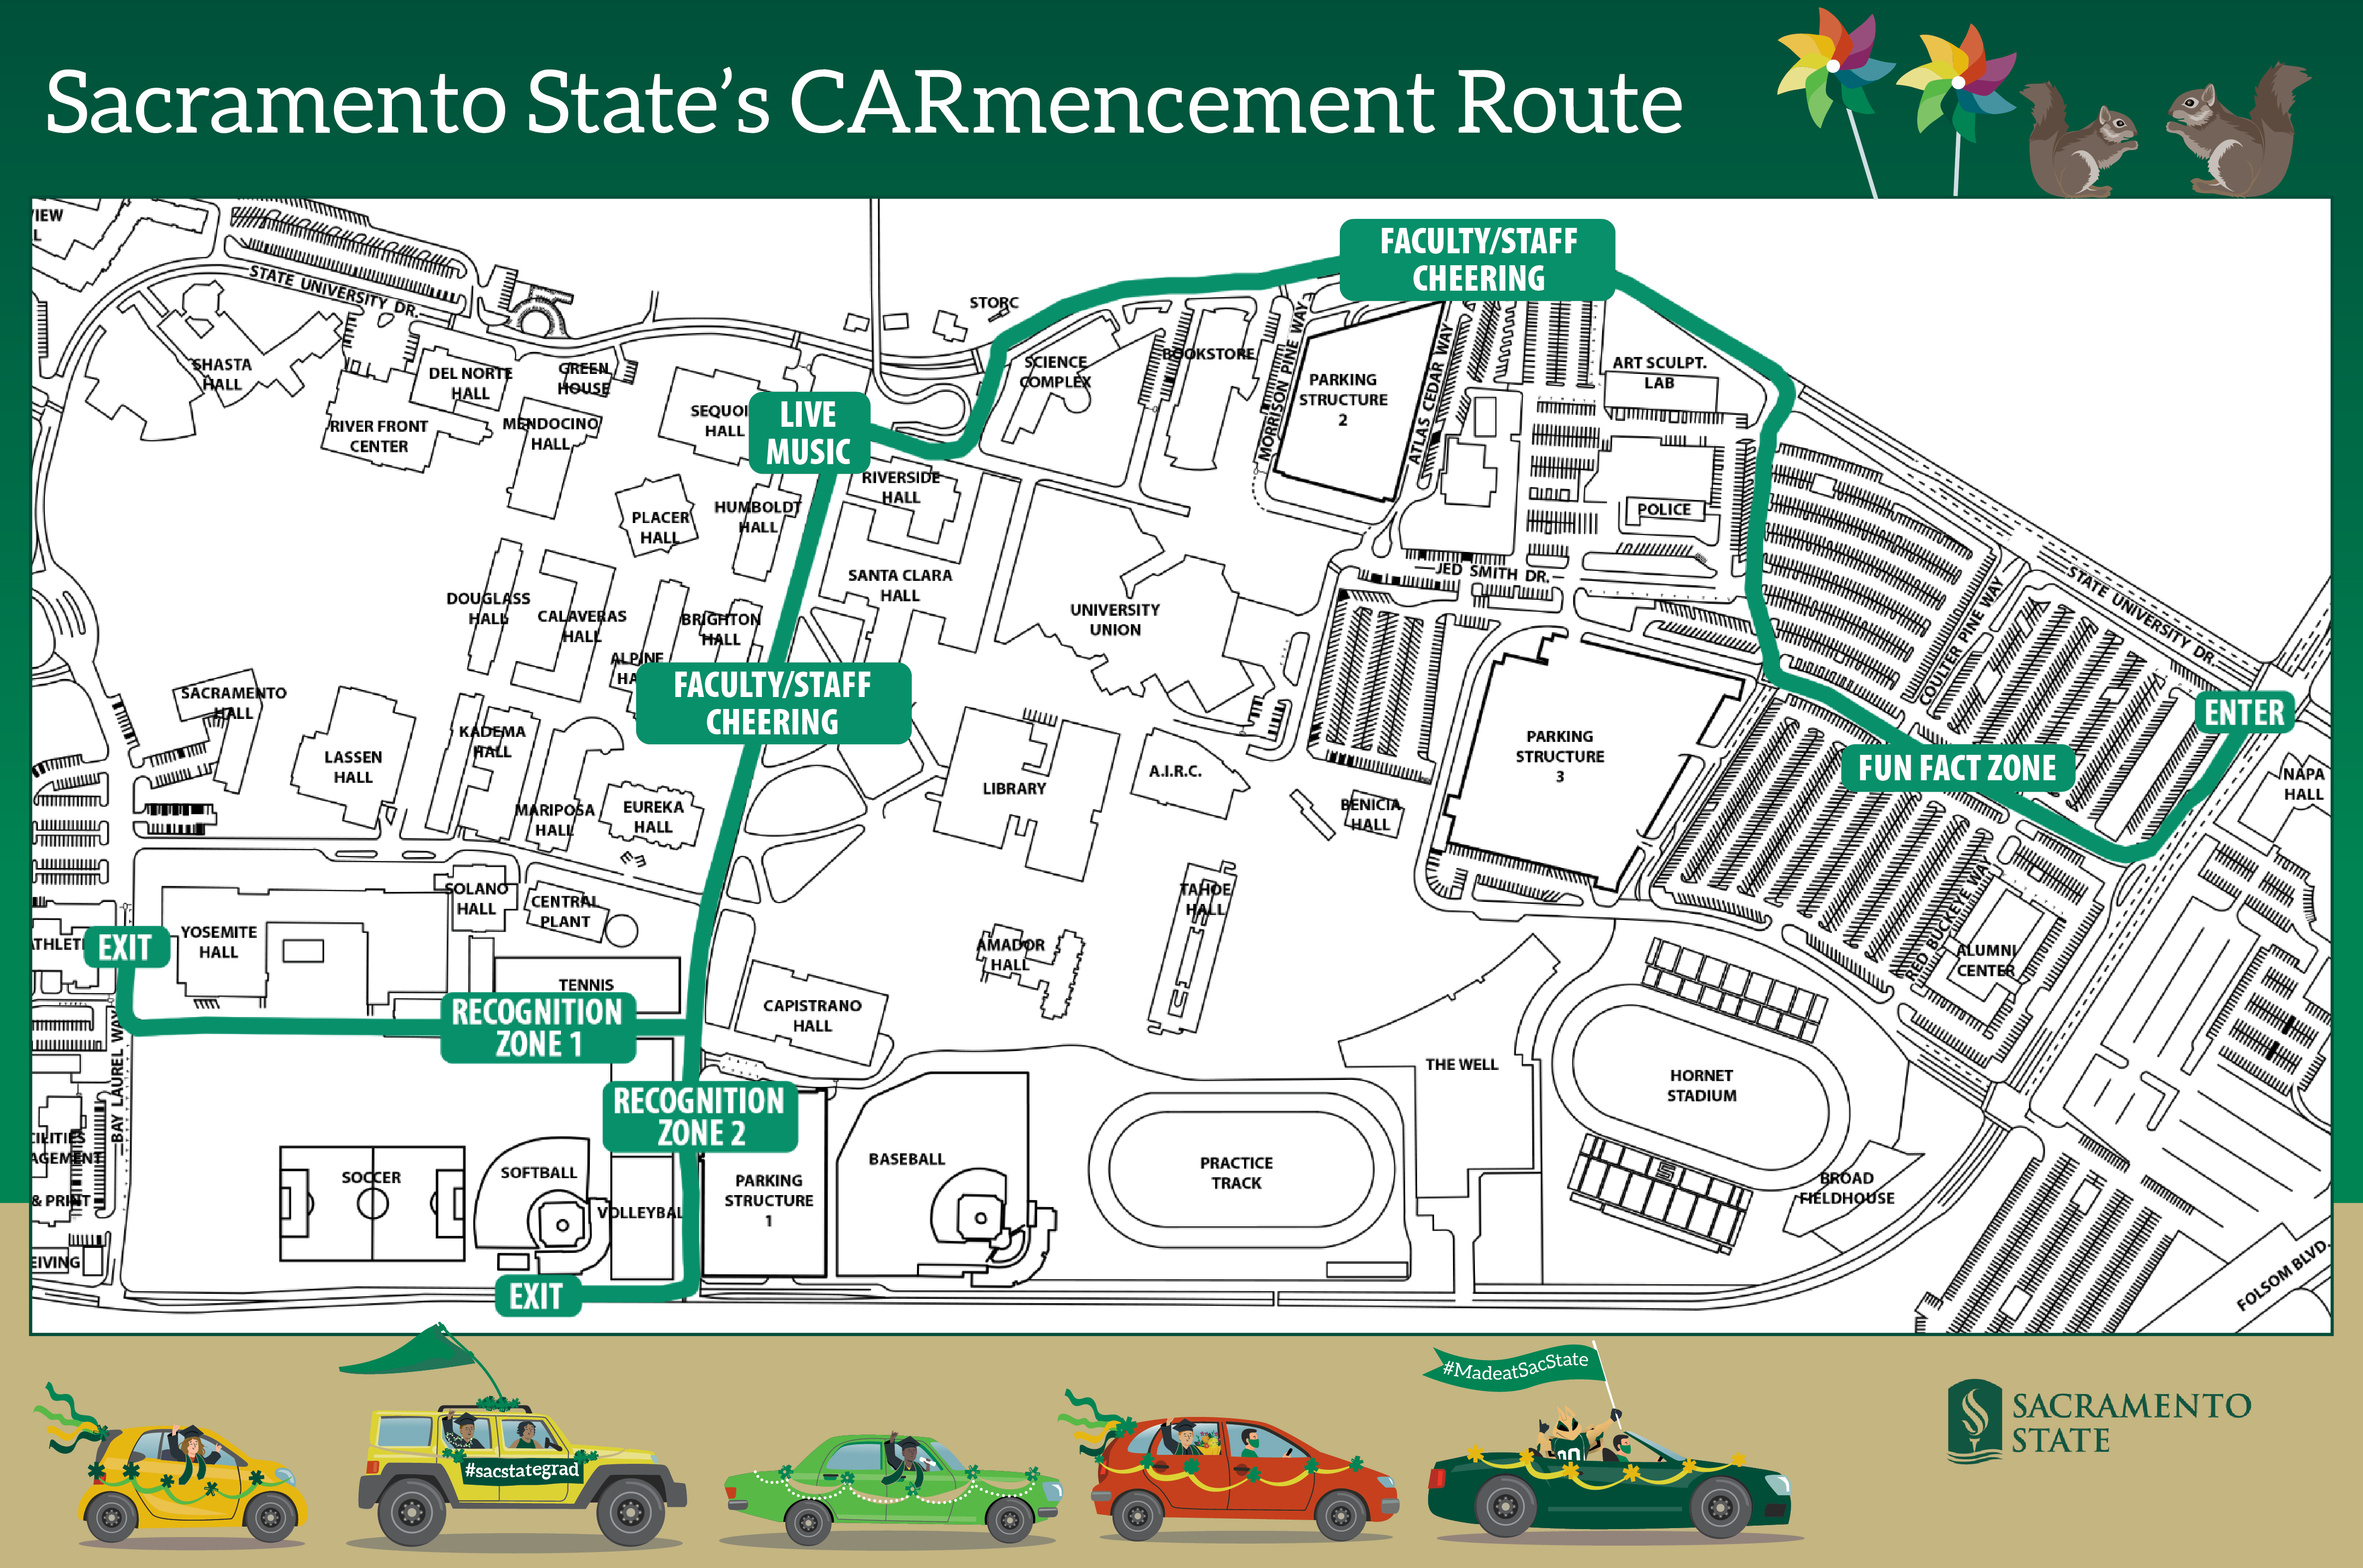 A map of the Sac State campus showing the route for CARmencement